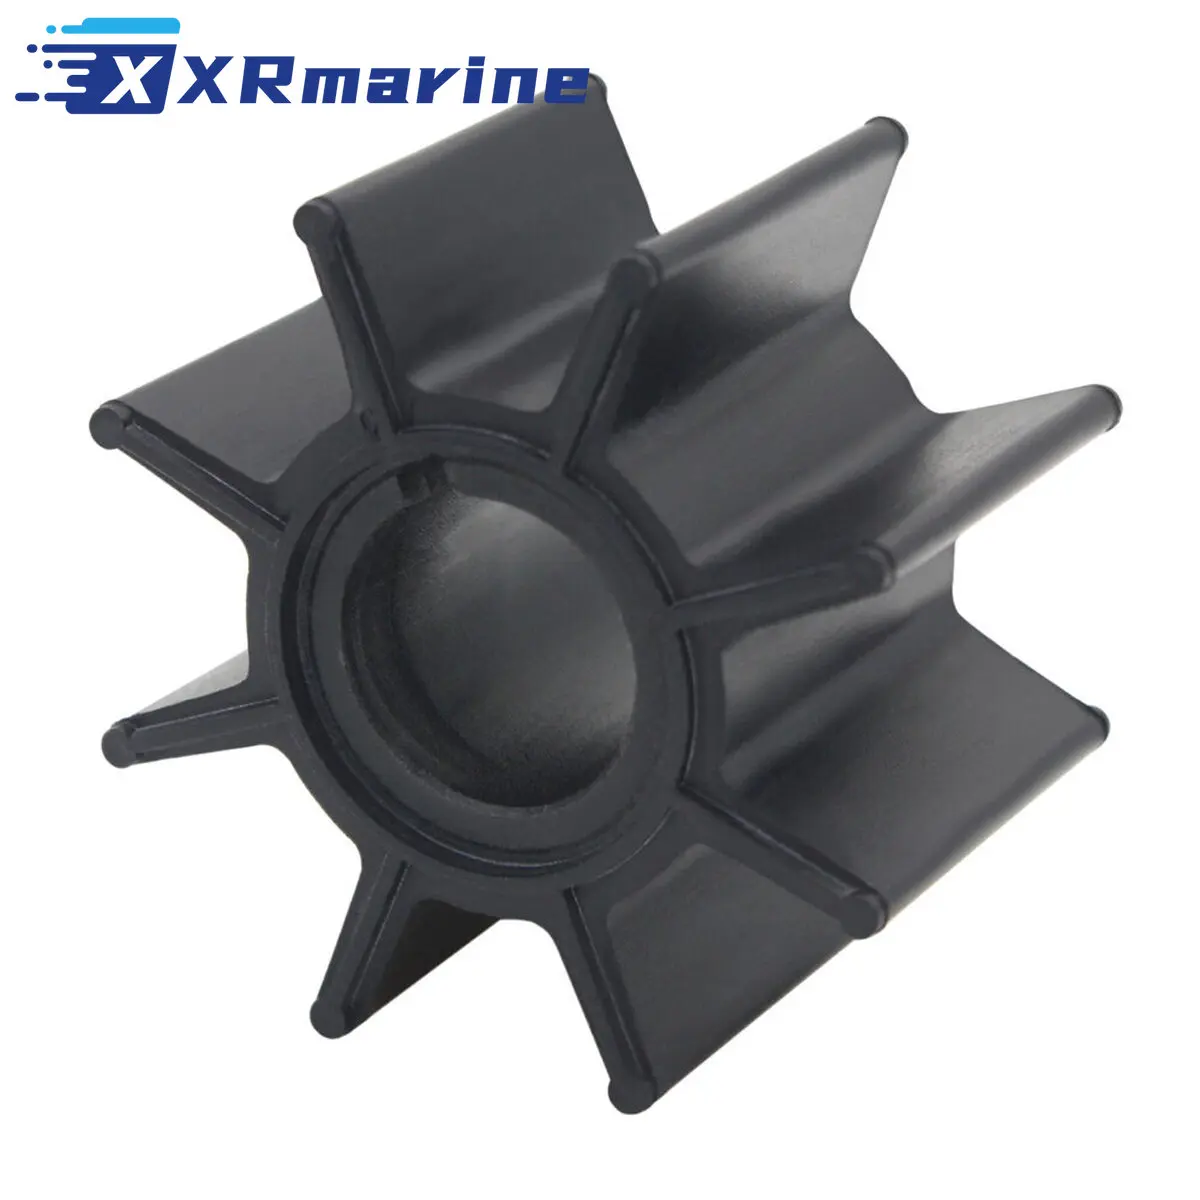 334-65021-0 Water Pump Impeller 334-65021-0M for Tohatsu Outboard Motor 334650210 9.9 15 18 20 HP 334650210M